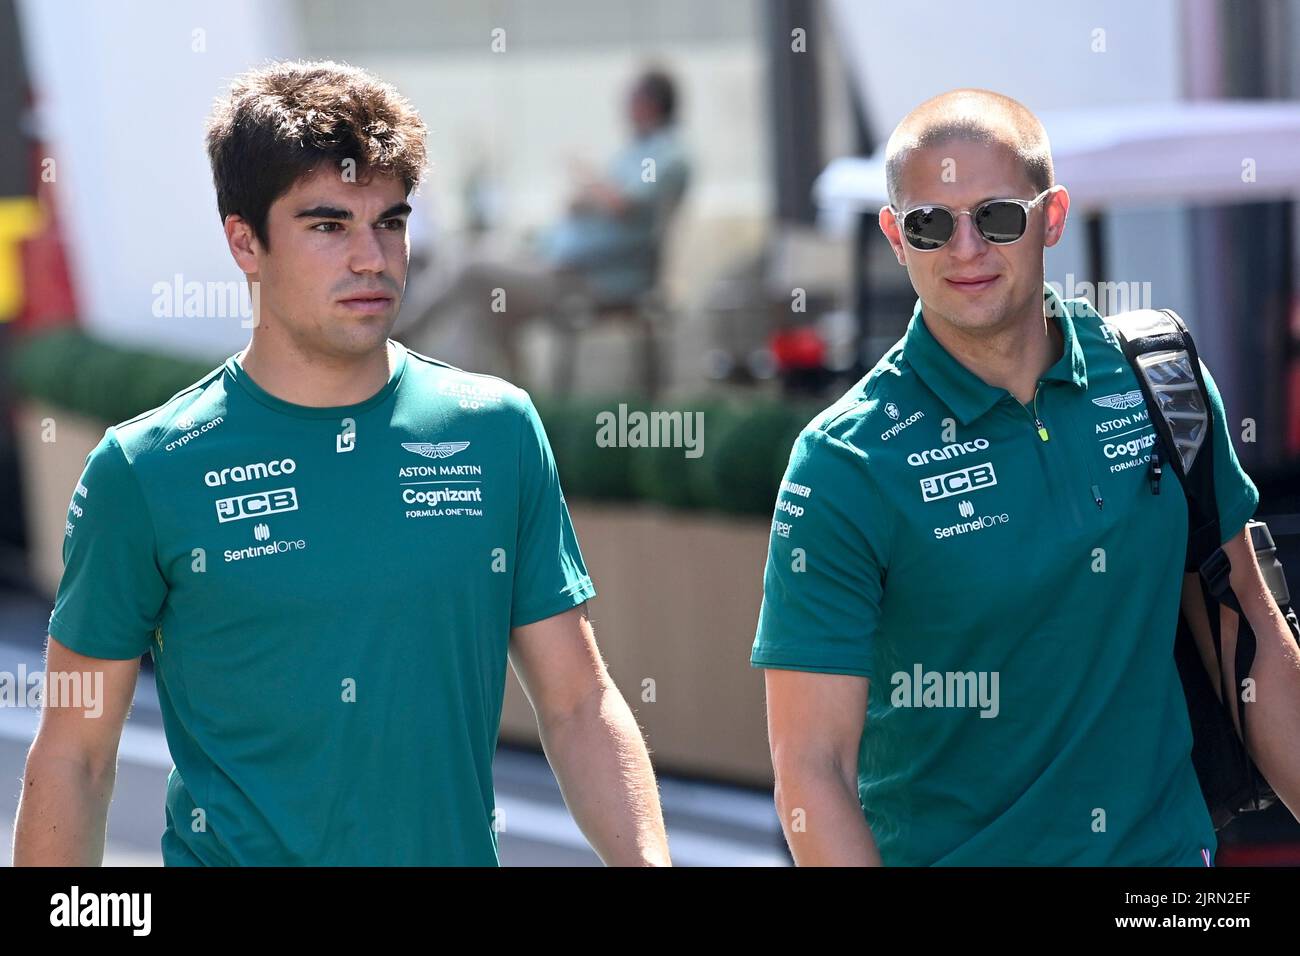 Aston Martin Aramco Cognizant Canadian rider Lance Stroll (L) pictured during preparations for the Grand Prix F1 of Belgium race, in Spa-Francorchamps, Wednesday 24 August 2022. The Spa-Francorchamps Formula One Grand Prix takes place this weekend, from August 26th to August 28th. BELGA PHOTO DIRK WAEM Stock Photo